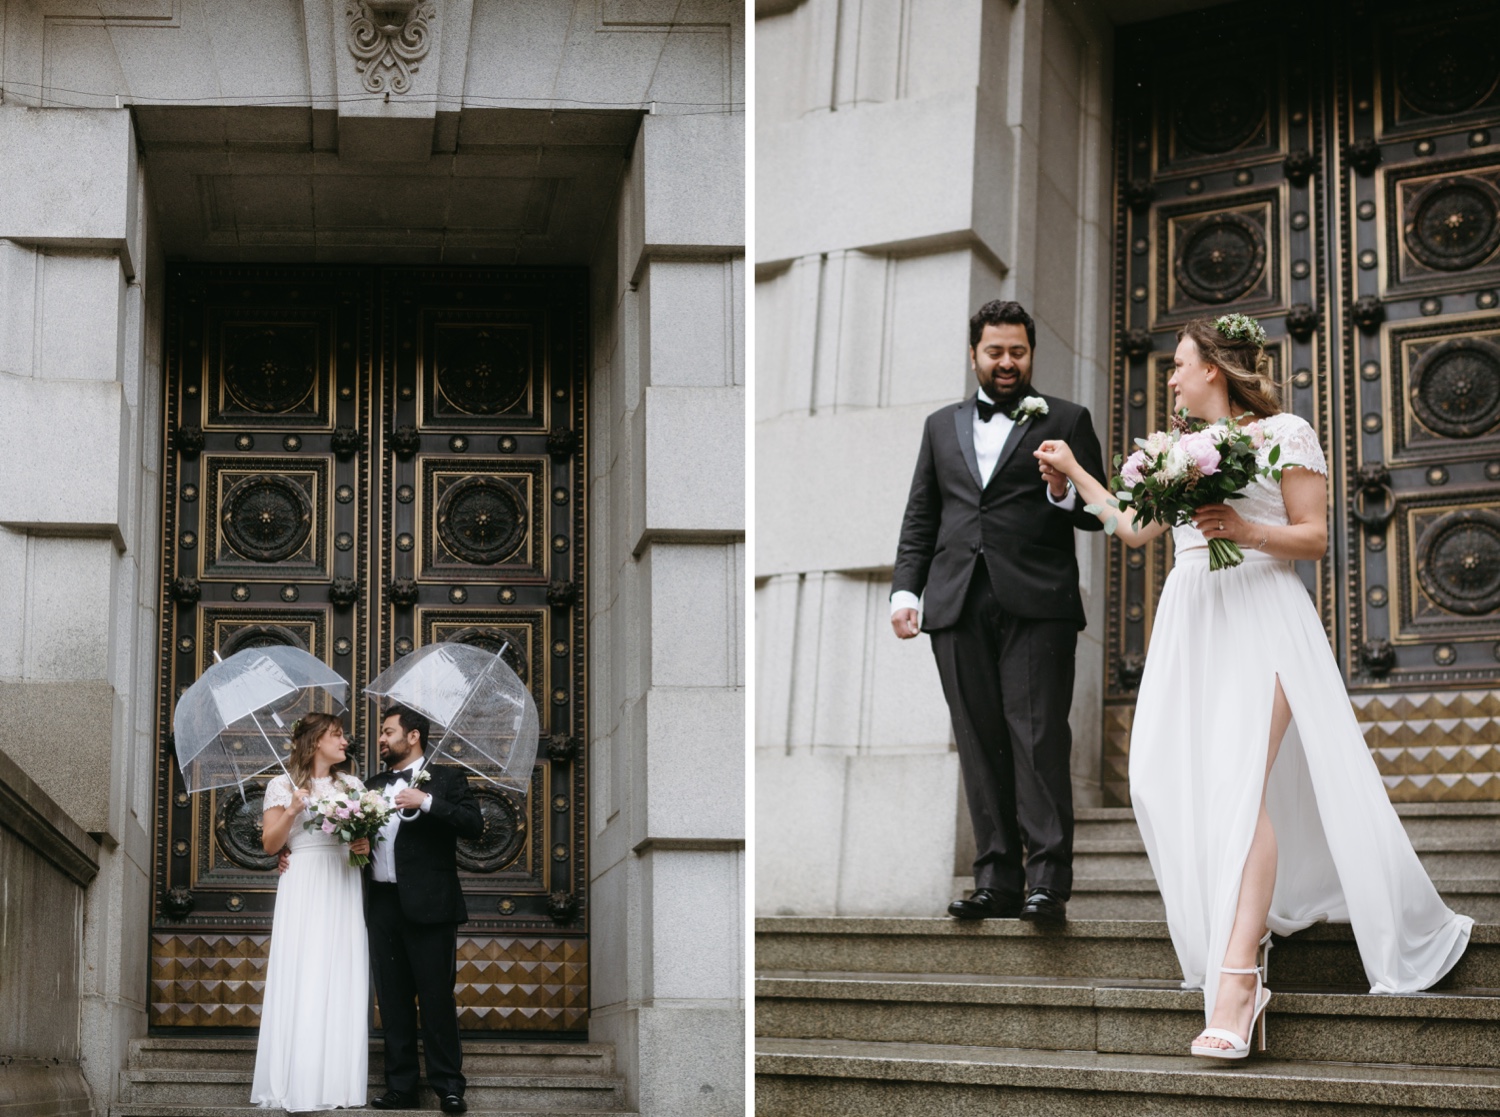 Rawlings Conservatory Baltimore Elopement bride and groom walking down steps of aged industrial building 